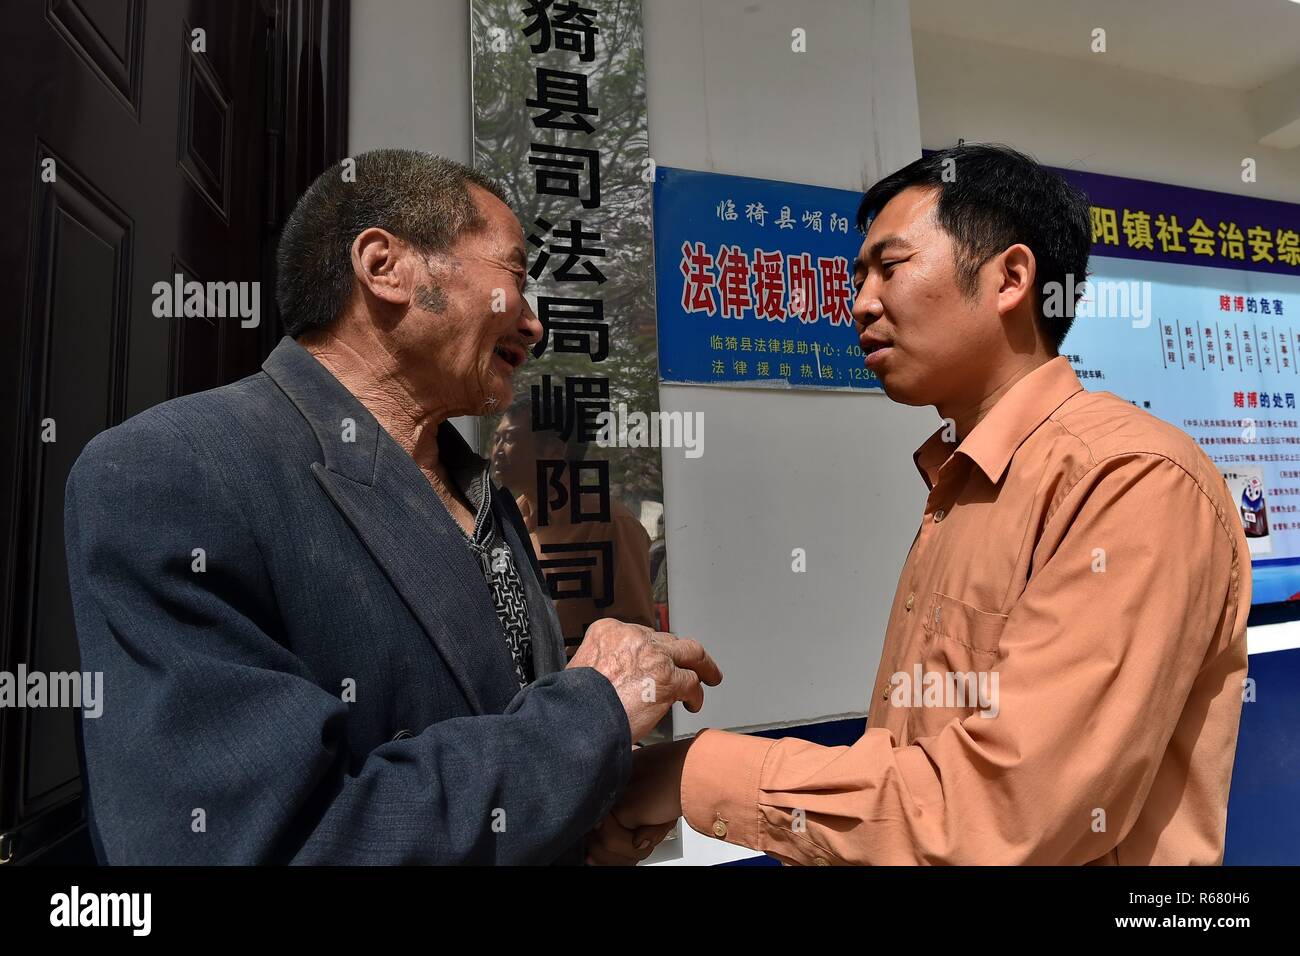 (181204) -- BEIJING, Dec. 4, 2018 (Xinhua) -- Villager Wen Xinmao shakes hands with Chen Jian (R), director of the judicial office of Meiyang Town, to extend his gratitude after a civil mediation in Meiyang Village, Linyi County of north China's Shanxi Province, April 18, 2017. Legal aid institutions across China have handled about 6.34 million cases during the past five years, helping 6.96 million people, the Ministry of Justice said Thursday. Over the past five years, legal aid institutions at all levels have helped 2.47 million migrant workers, 328,000 people with disabilities, 585, 0 Stock Photo